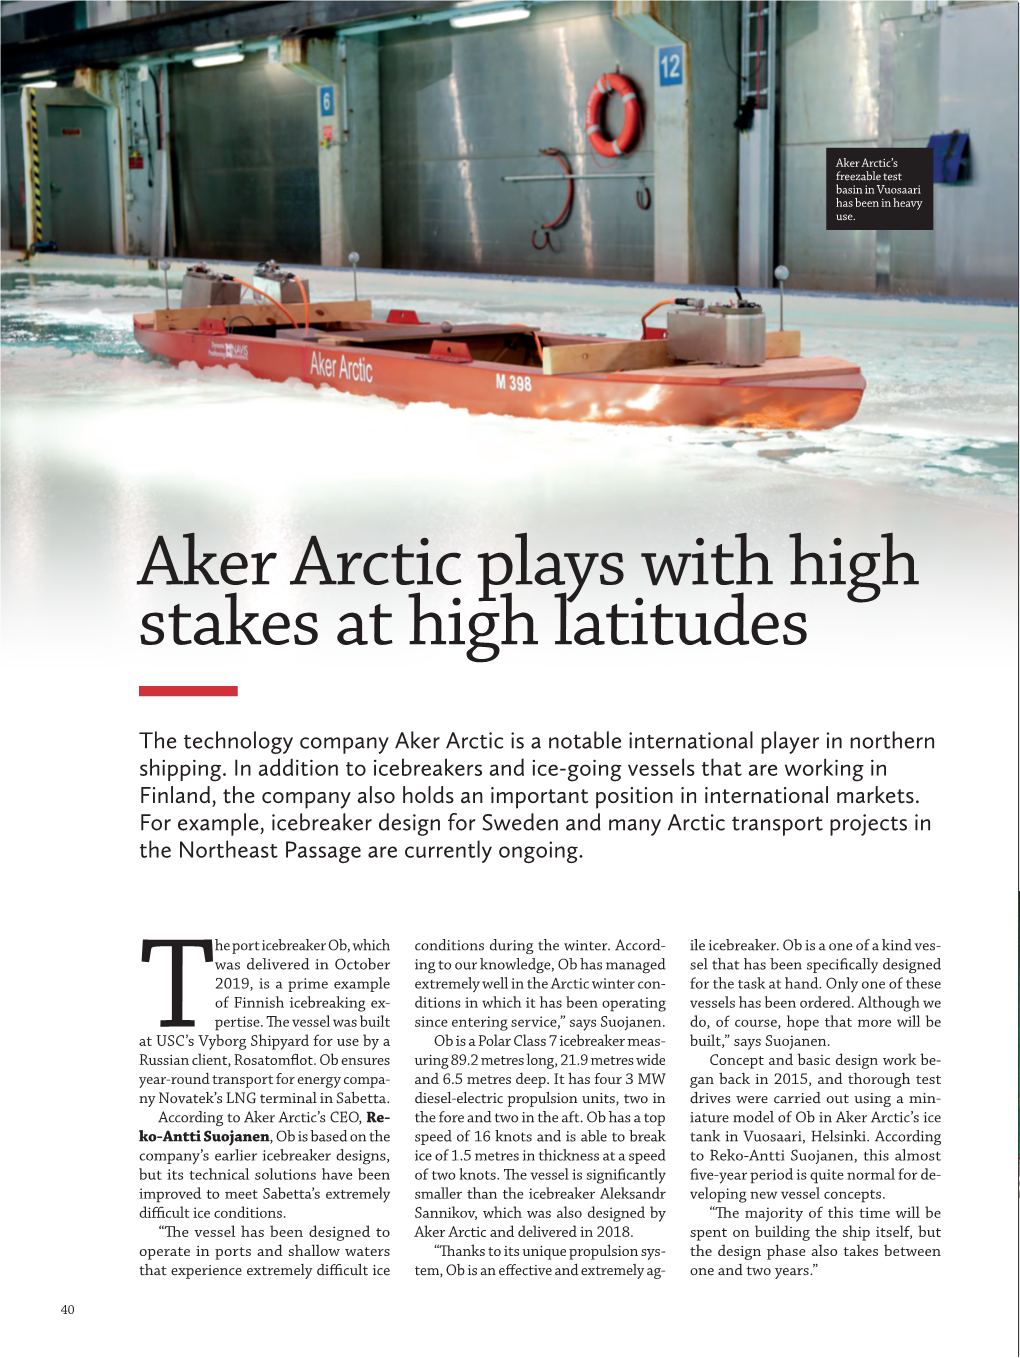 Aker Arctic Plays with High Stakes at High Latitudes